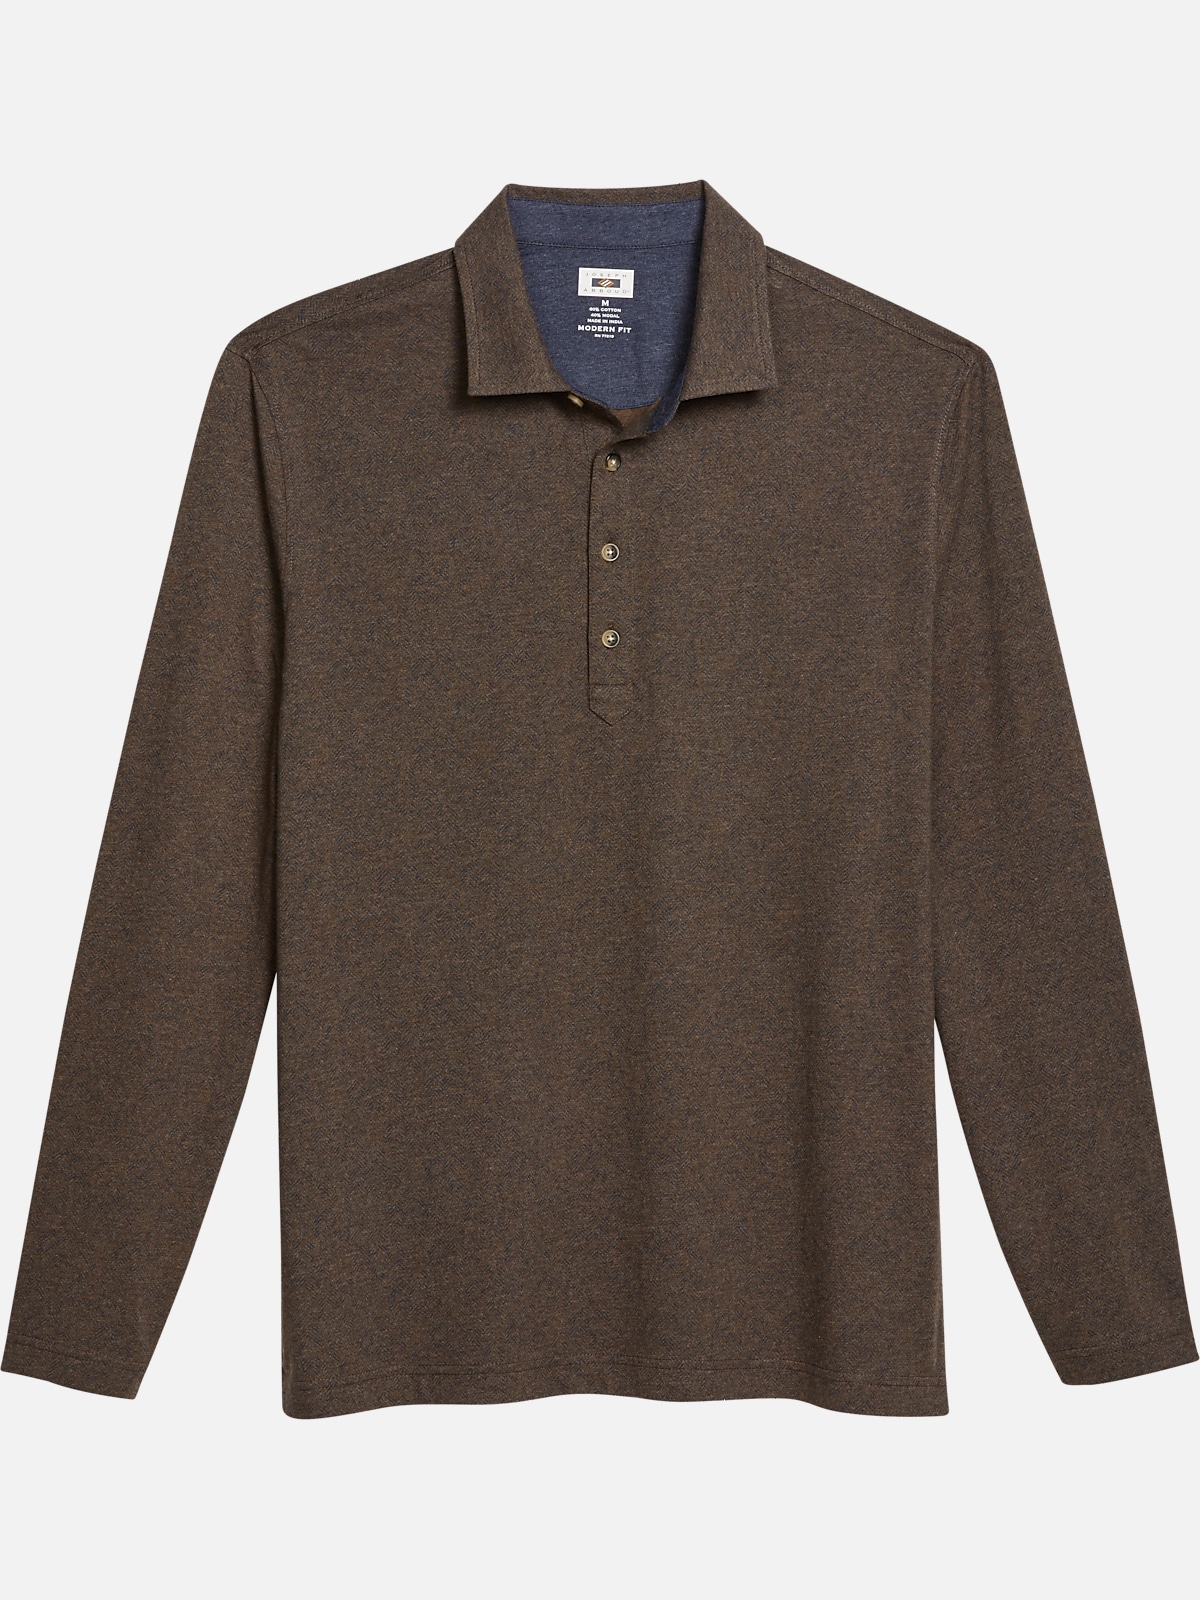 Casual Shirts for Men: Buy Best Casual Shirts for Men Online